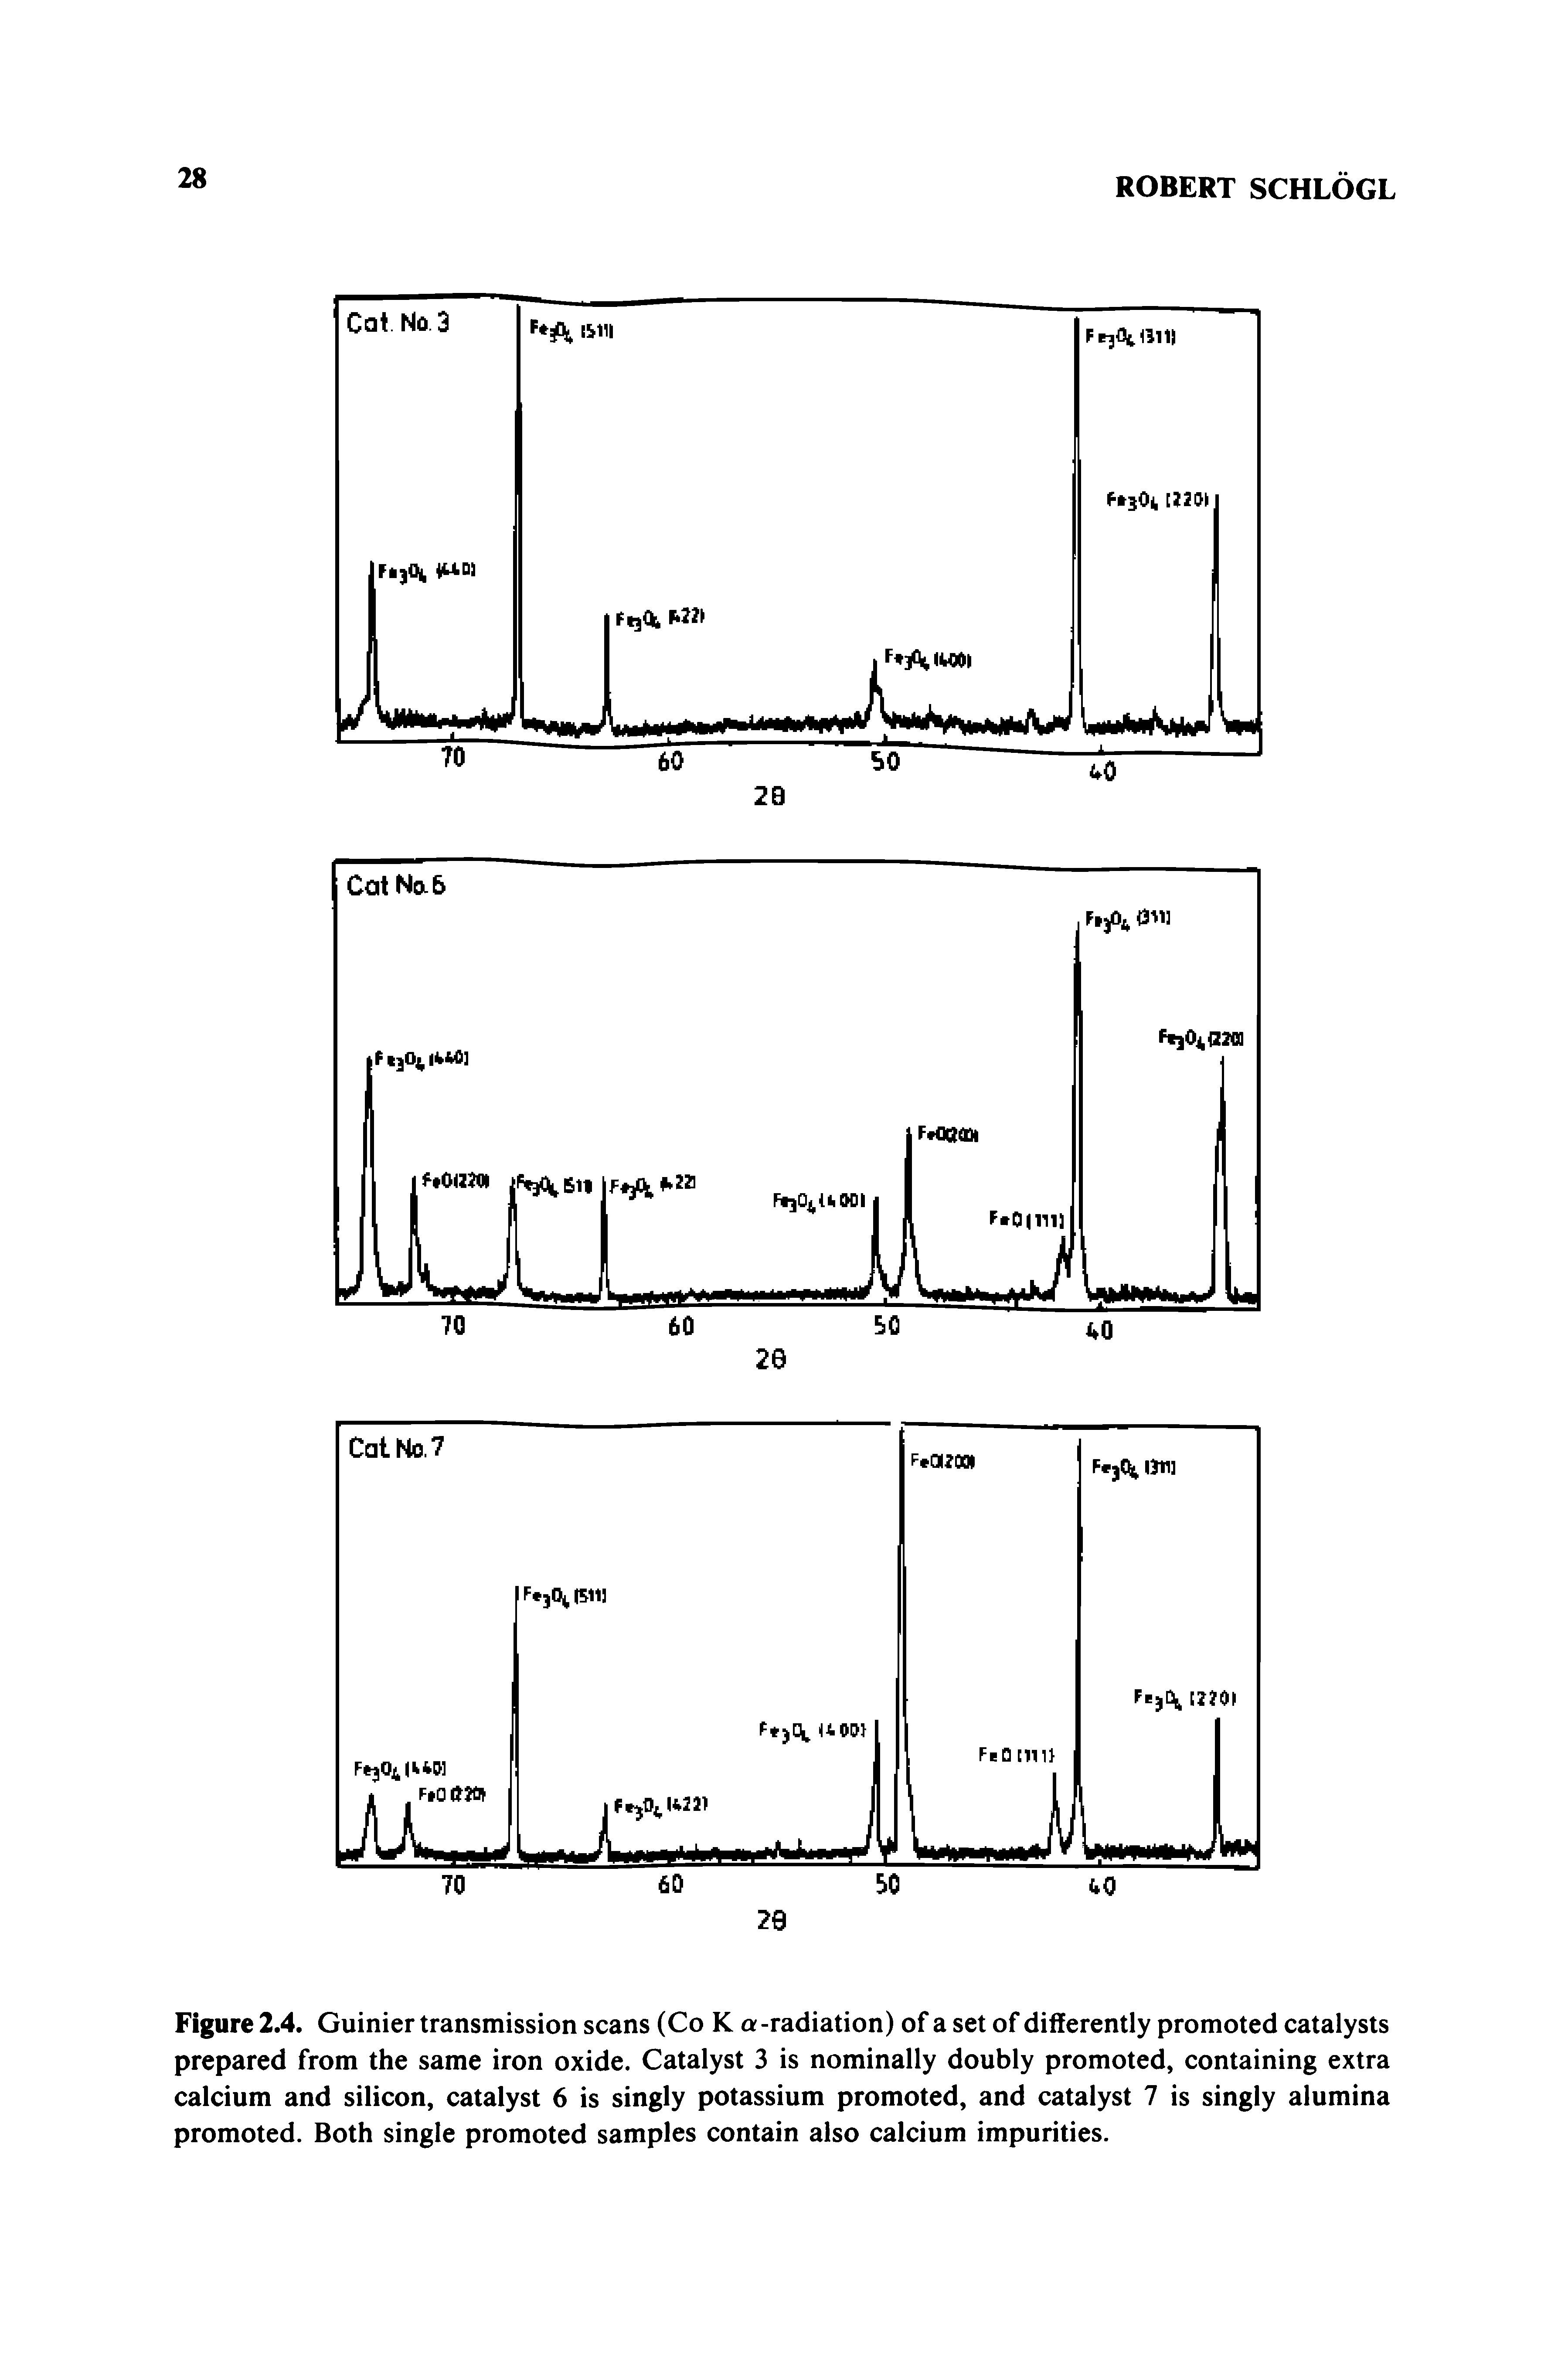 Figure 2.4. Guinier transmission scans (Co K a-radiation) of a set of differently promoted catalysts prepared from the same iron oxide. Catalyst 3 is nominally doubly promoted, containing extra calcium and silicon, catalyst 6 is singly potassium promoted, and catalyst 7 is singly alumina promoted. Both single promoted samples contain also calcium impurities.